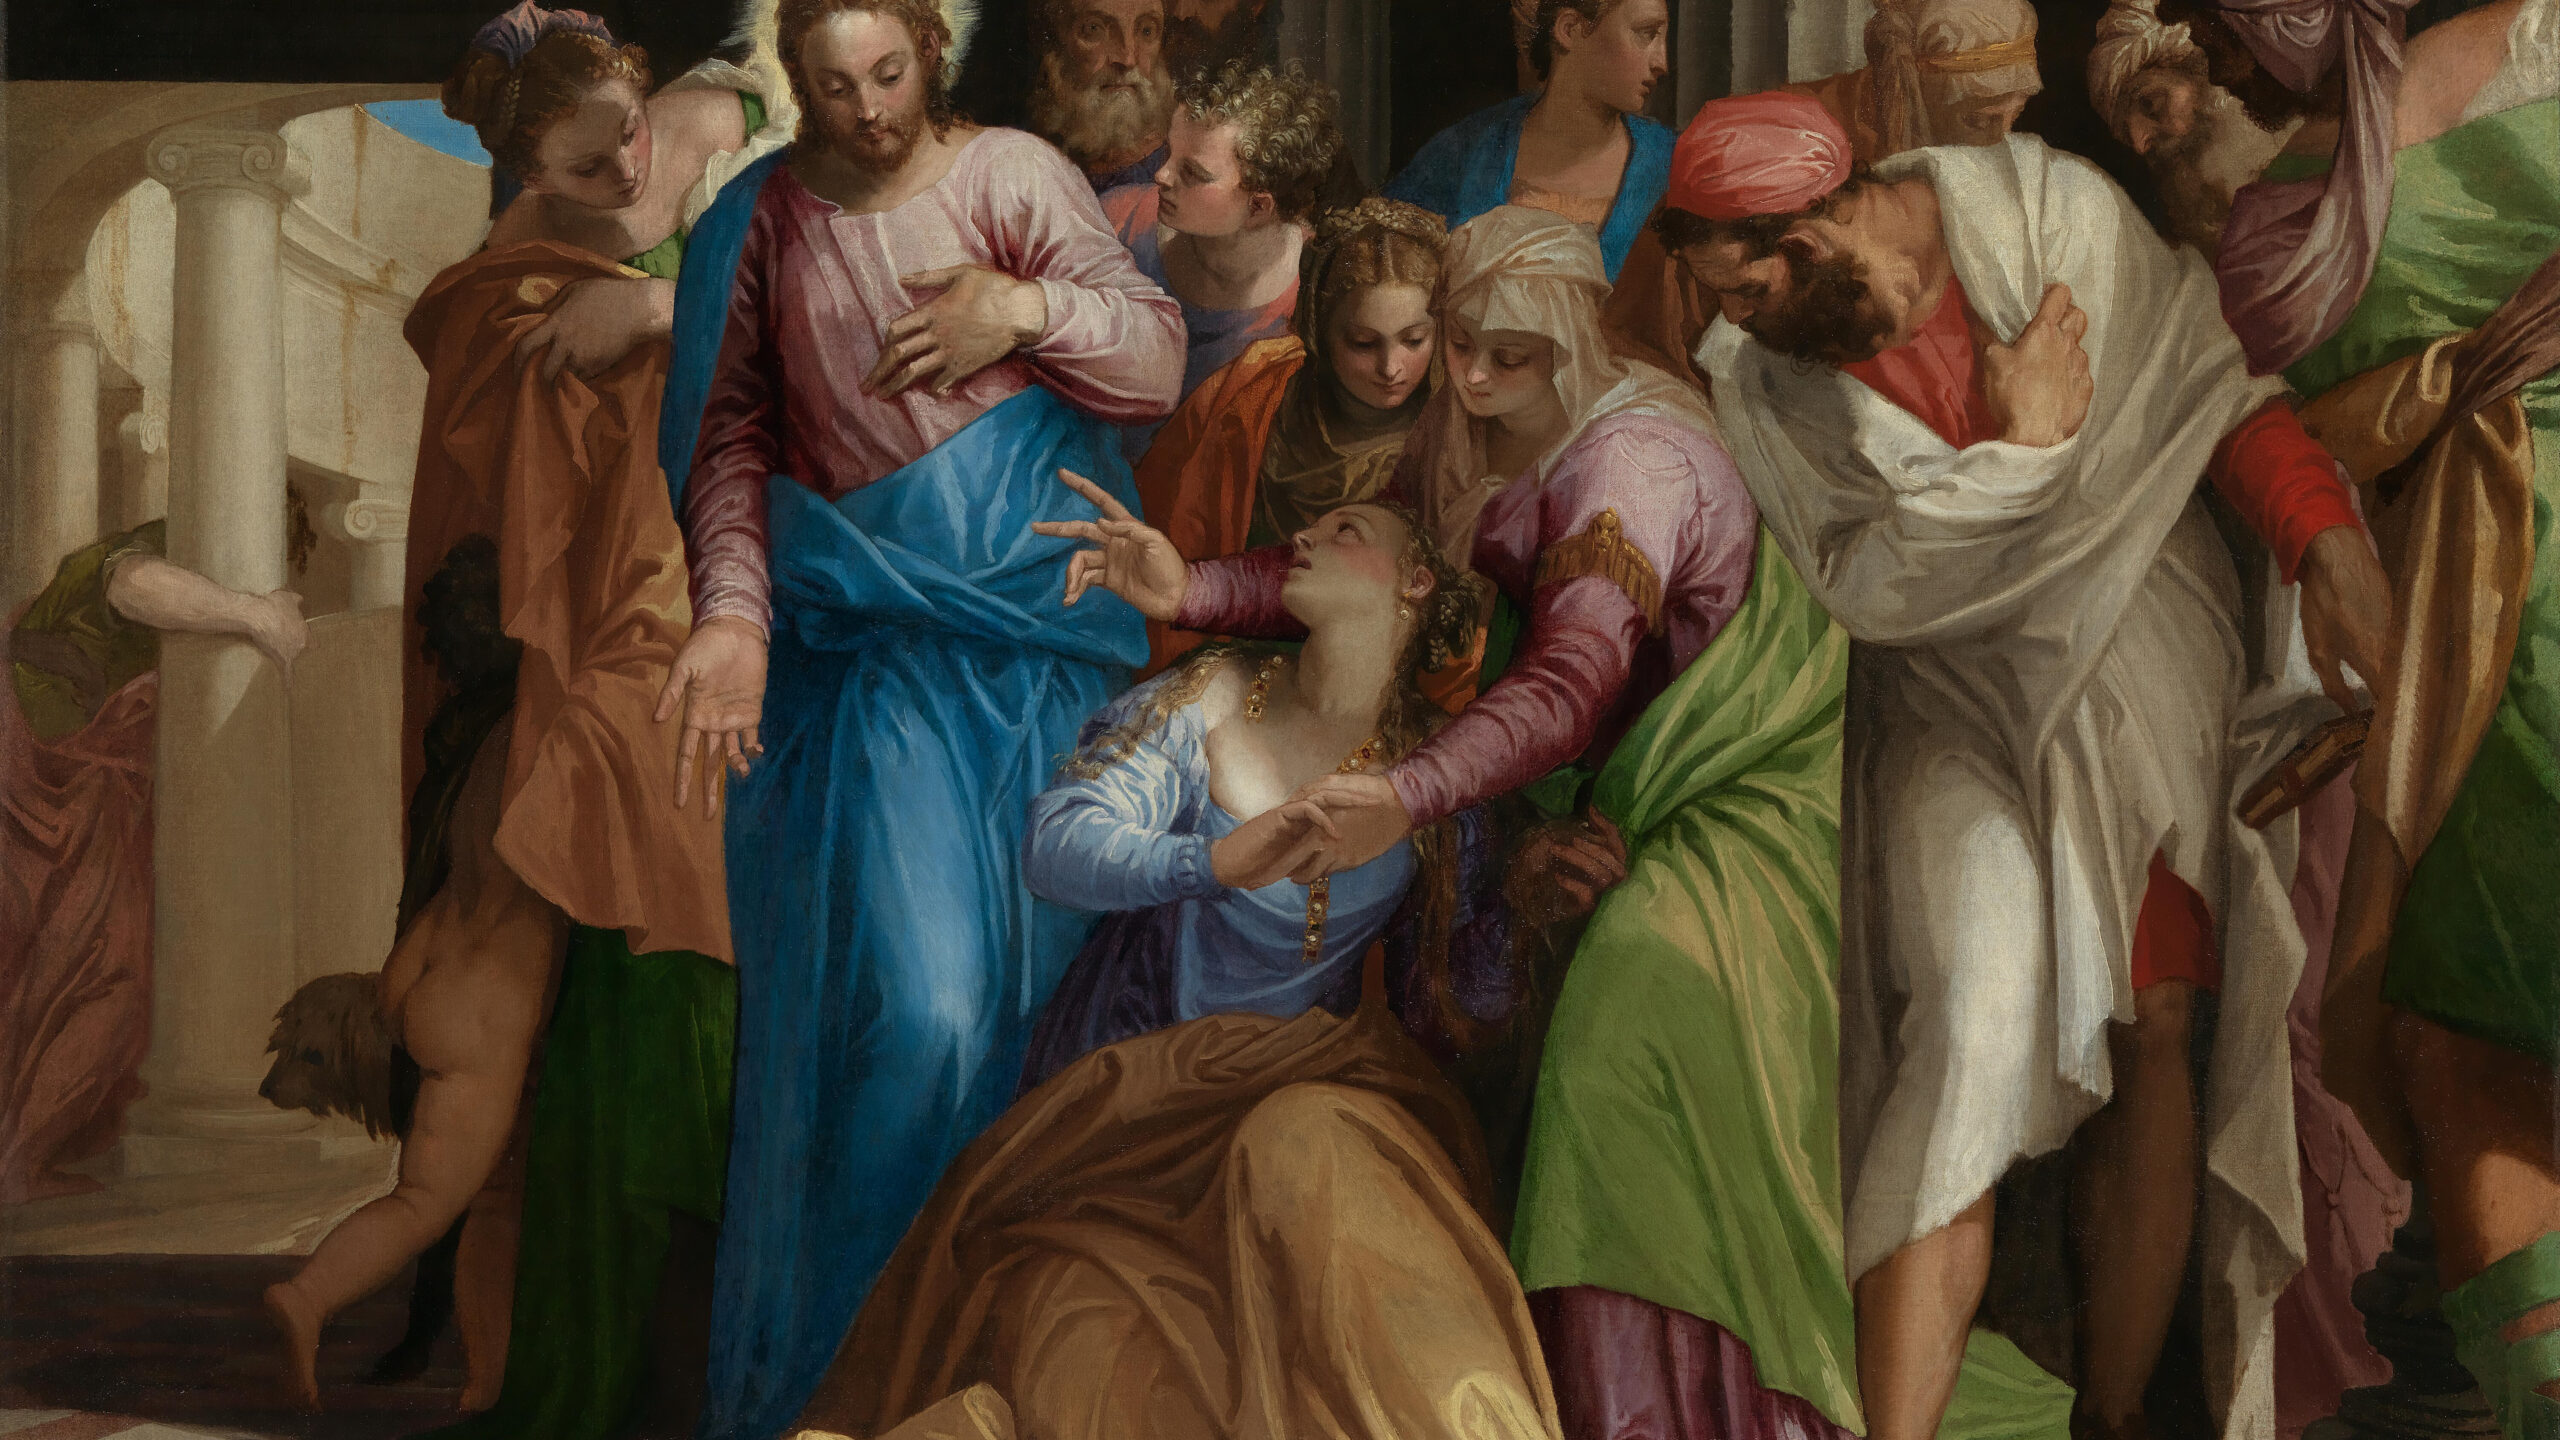 Image of the conversion of Mary Magdalene